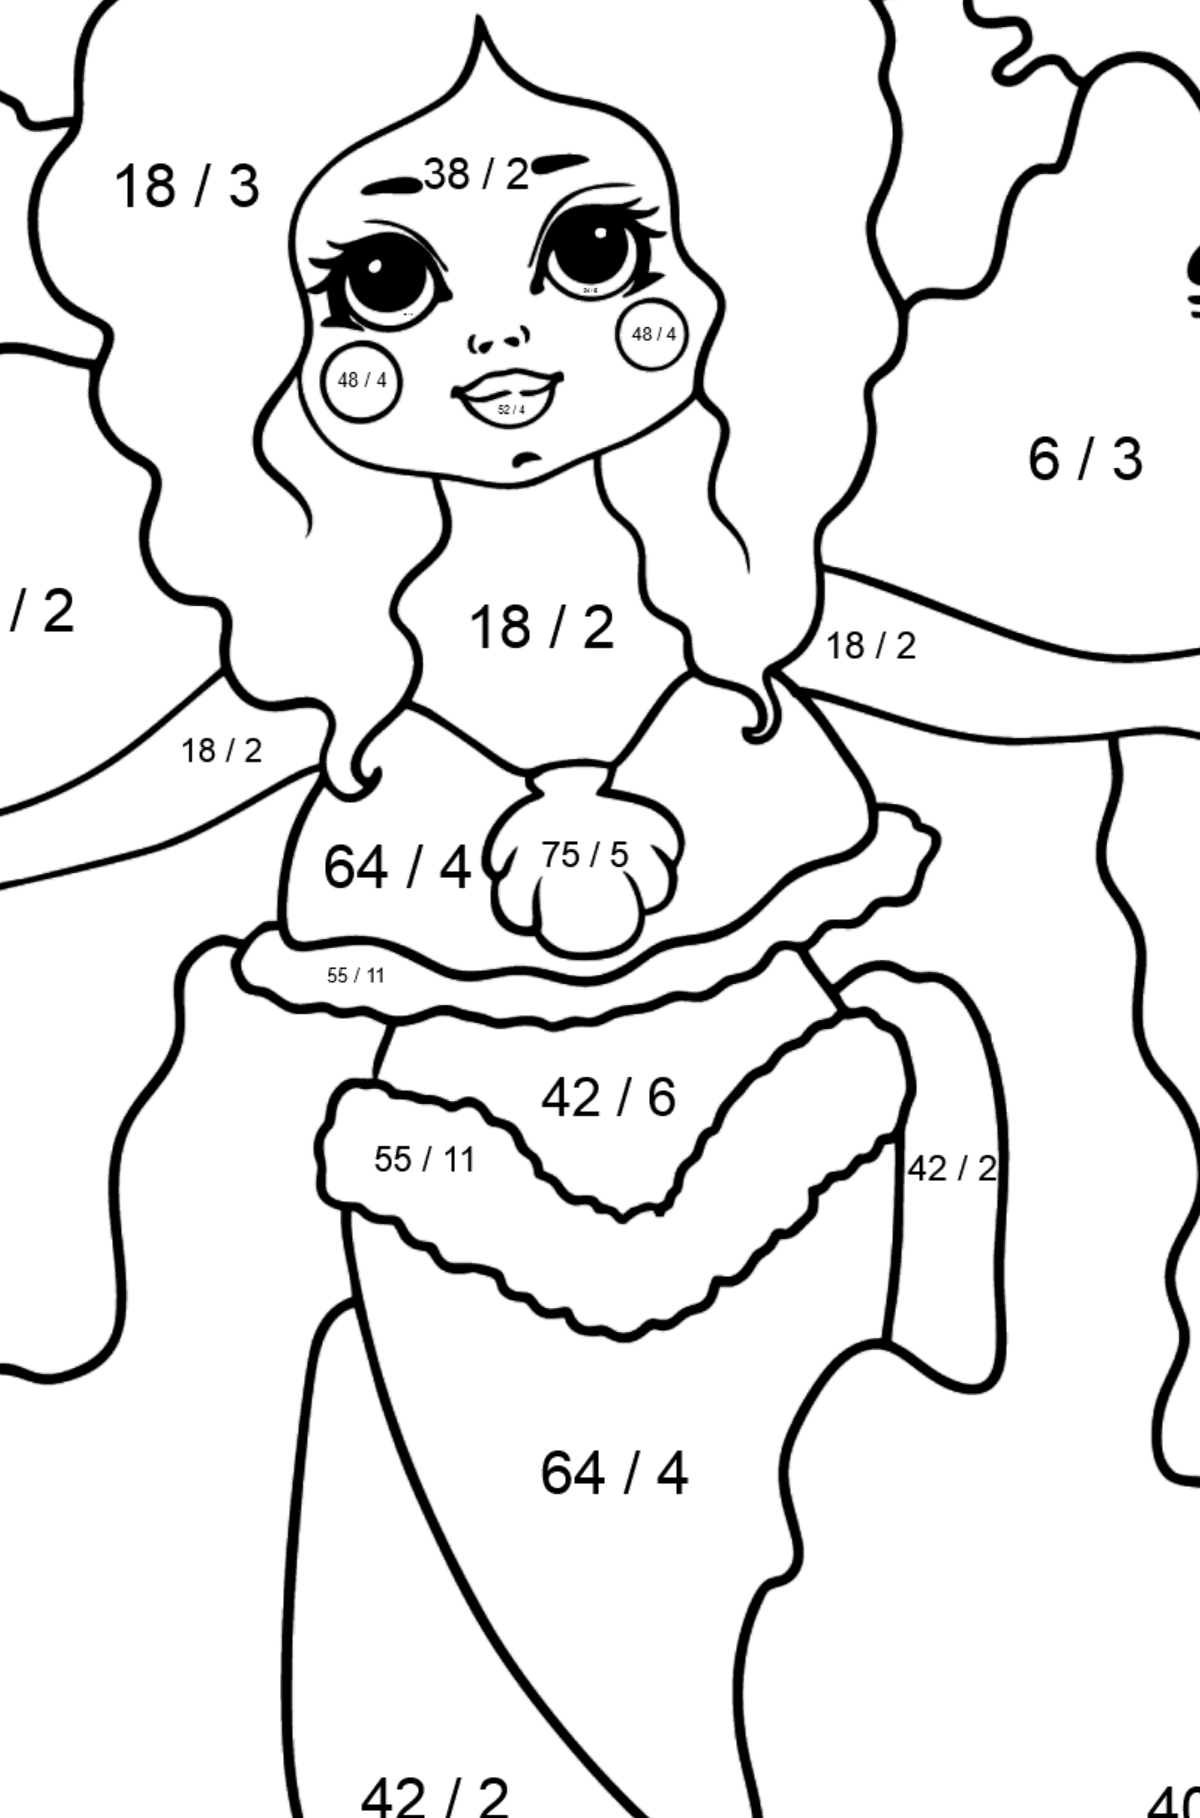 Mermaid and Colorful Corals coloring page - Math Coloring - Division for Kids